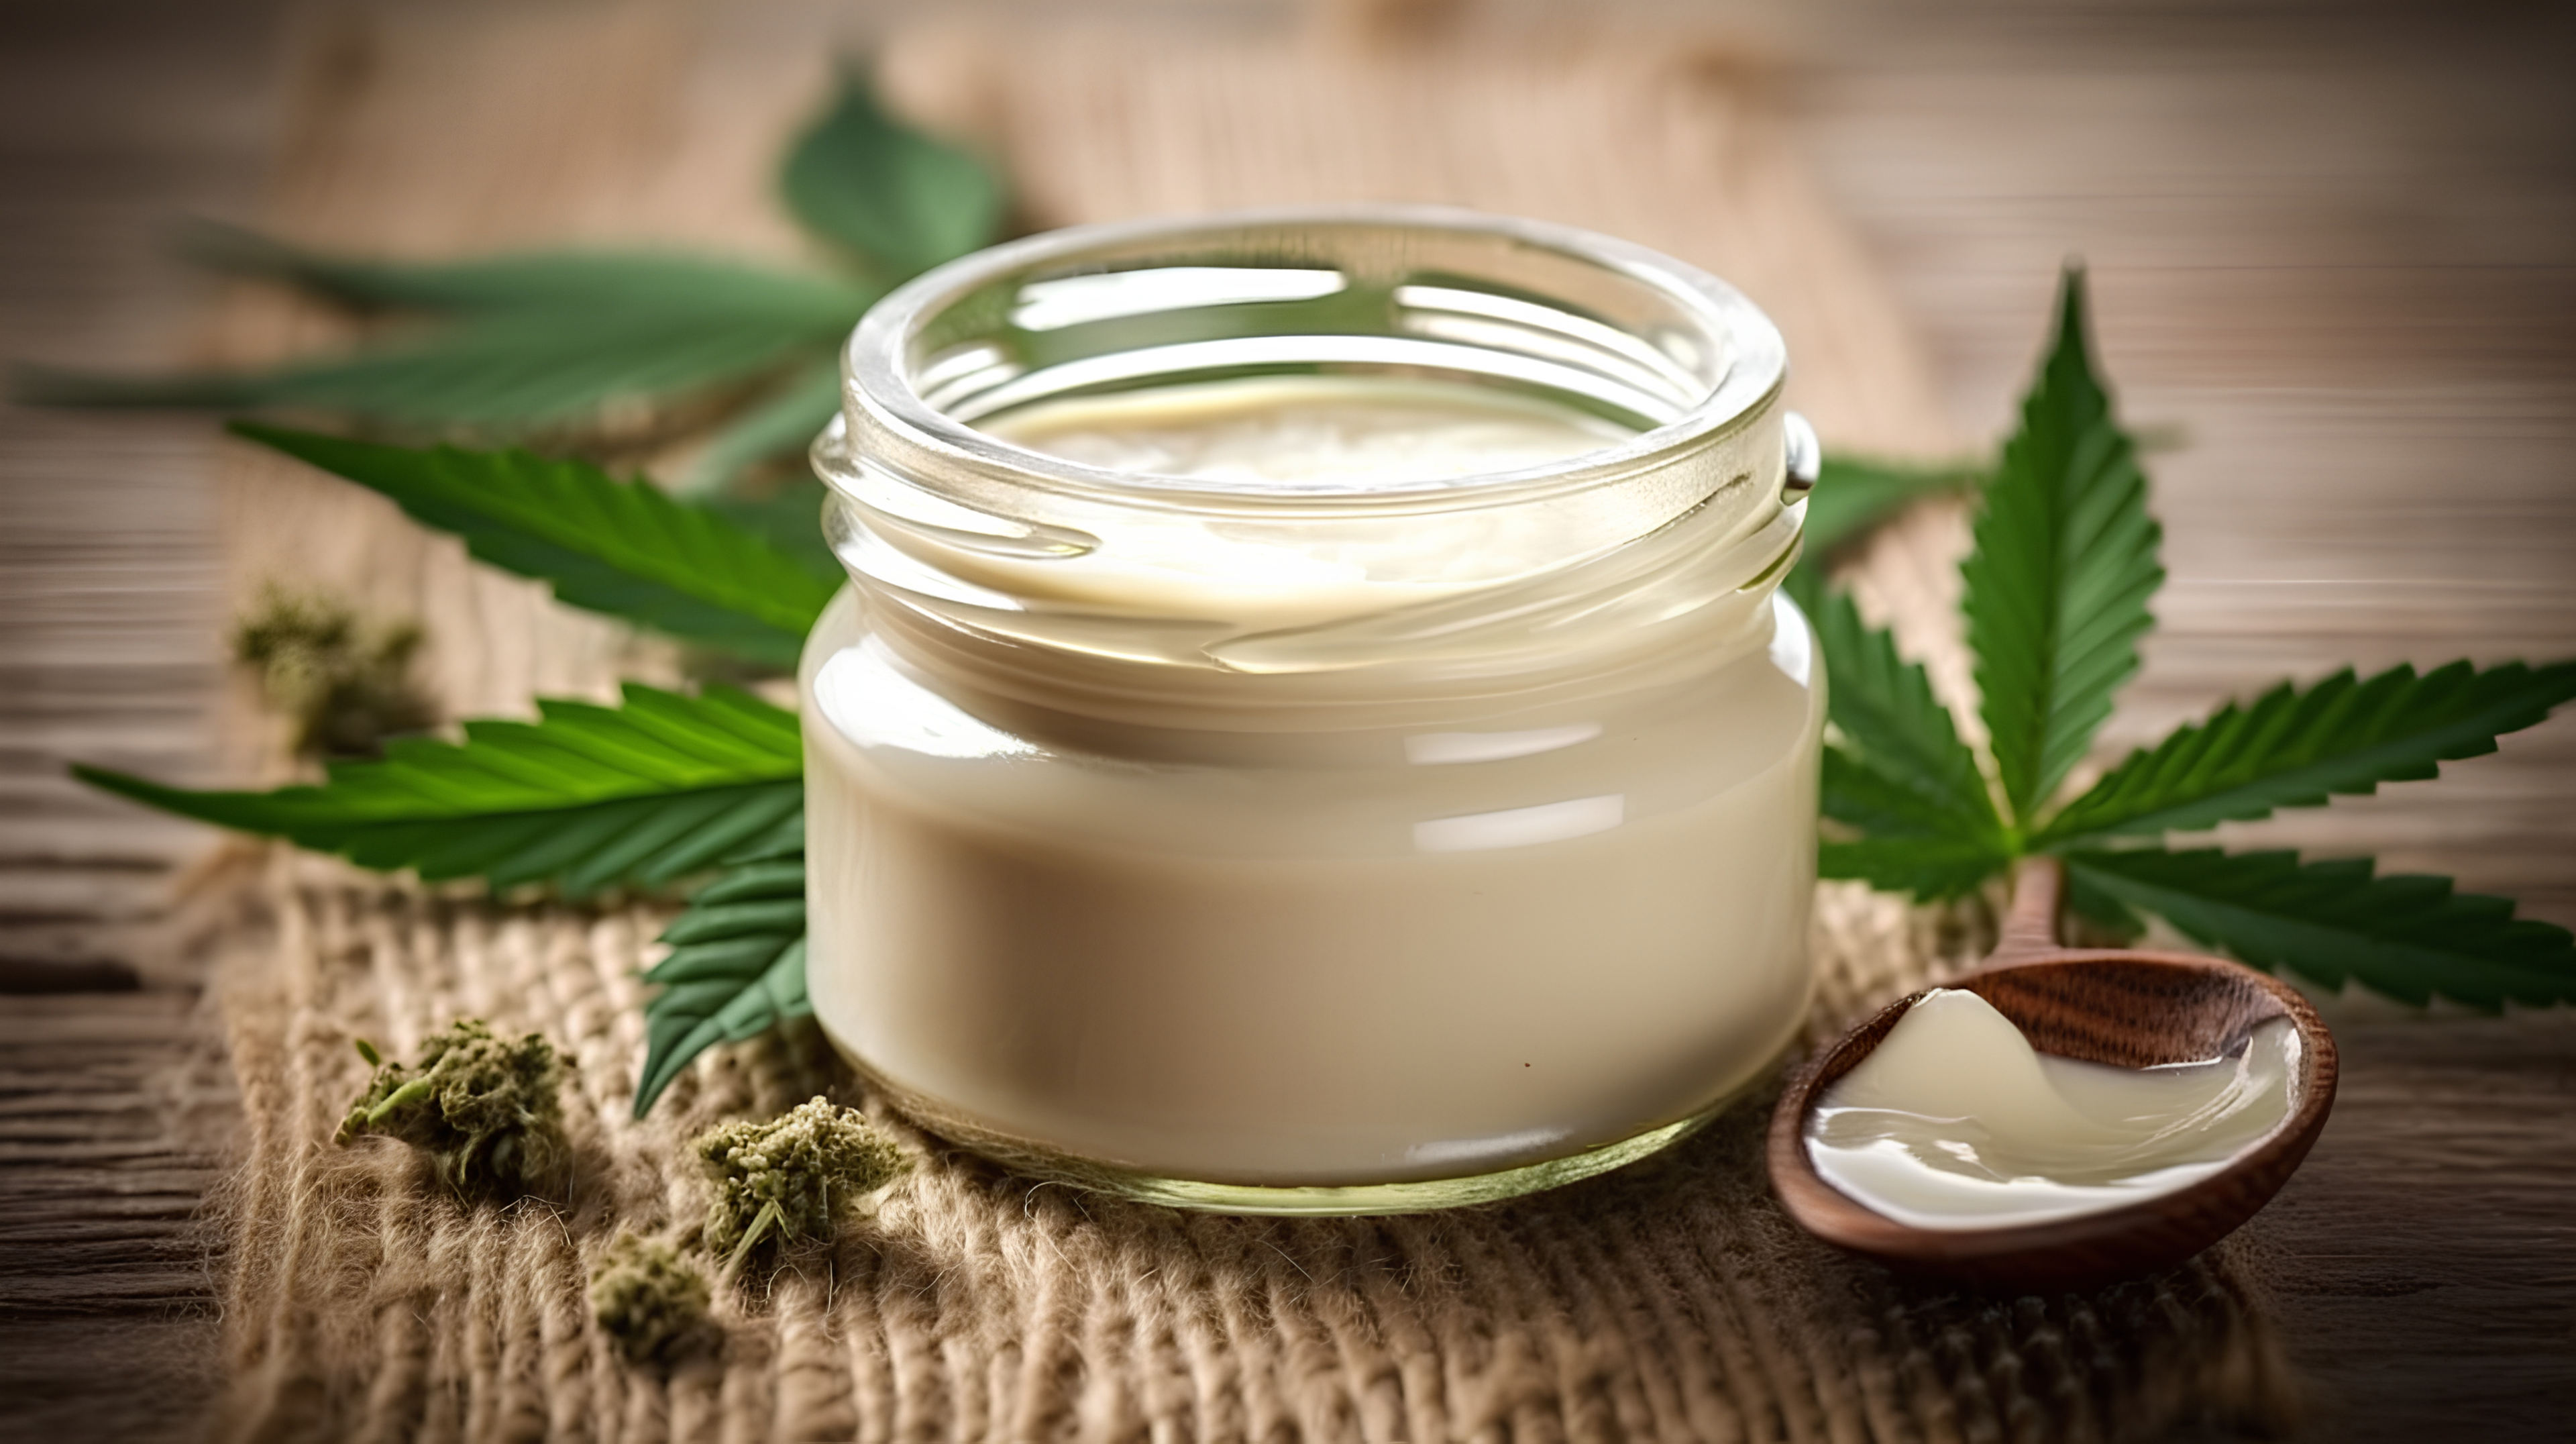 It's unclear how many peer reviewed studies there might be on how CBD might cause muscle to react. Muscles may or may not respond similarly across individuals. Muscles can get overworked, where they need rest. Be sure to consult with a doctor before including into your regimen, especially if you're on other medications. 